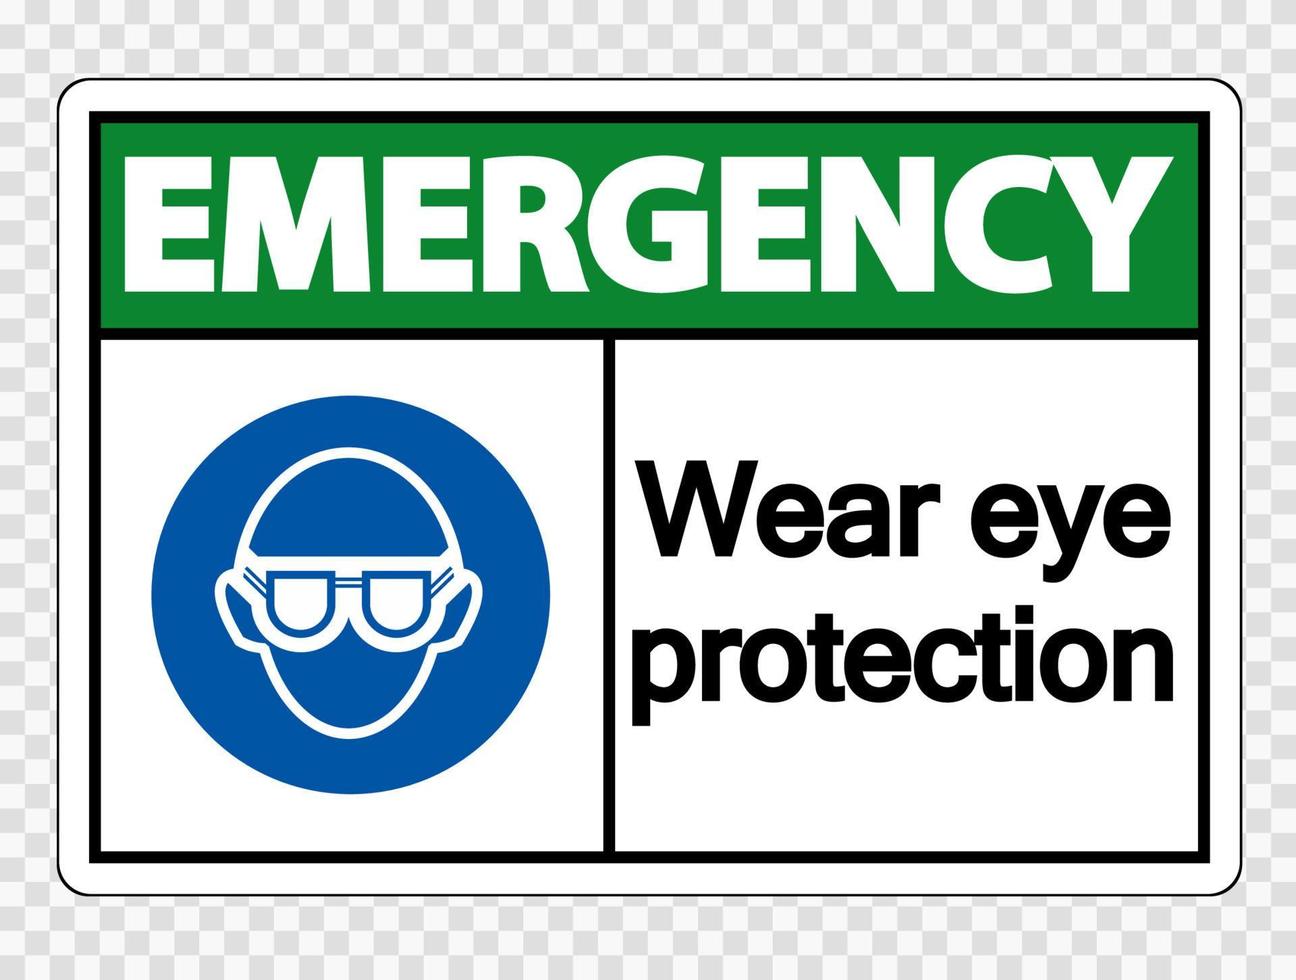 Emergency Wear eye protection on transparent background vector